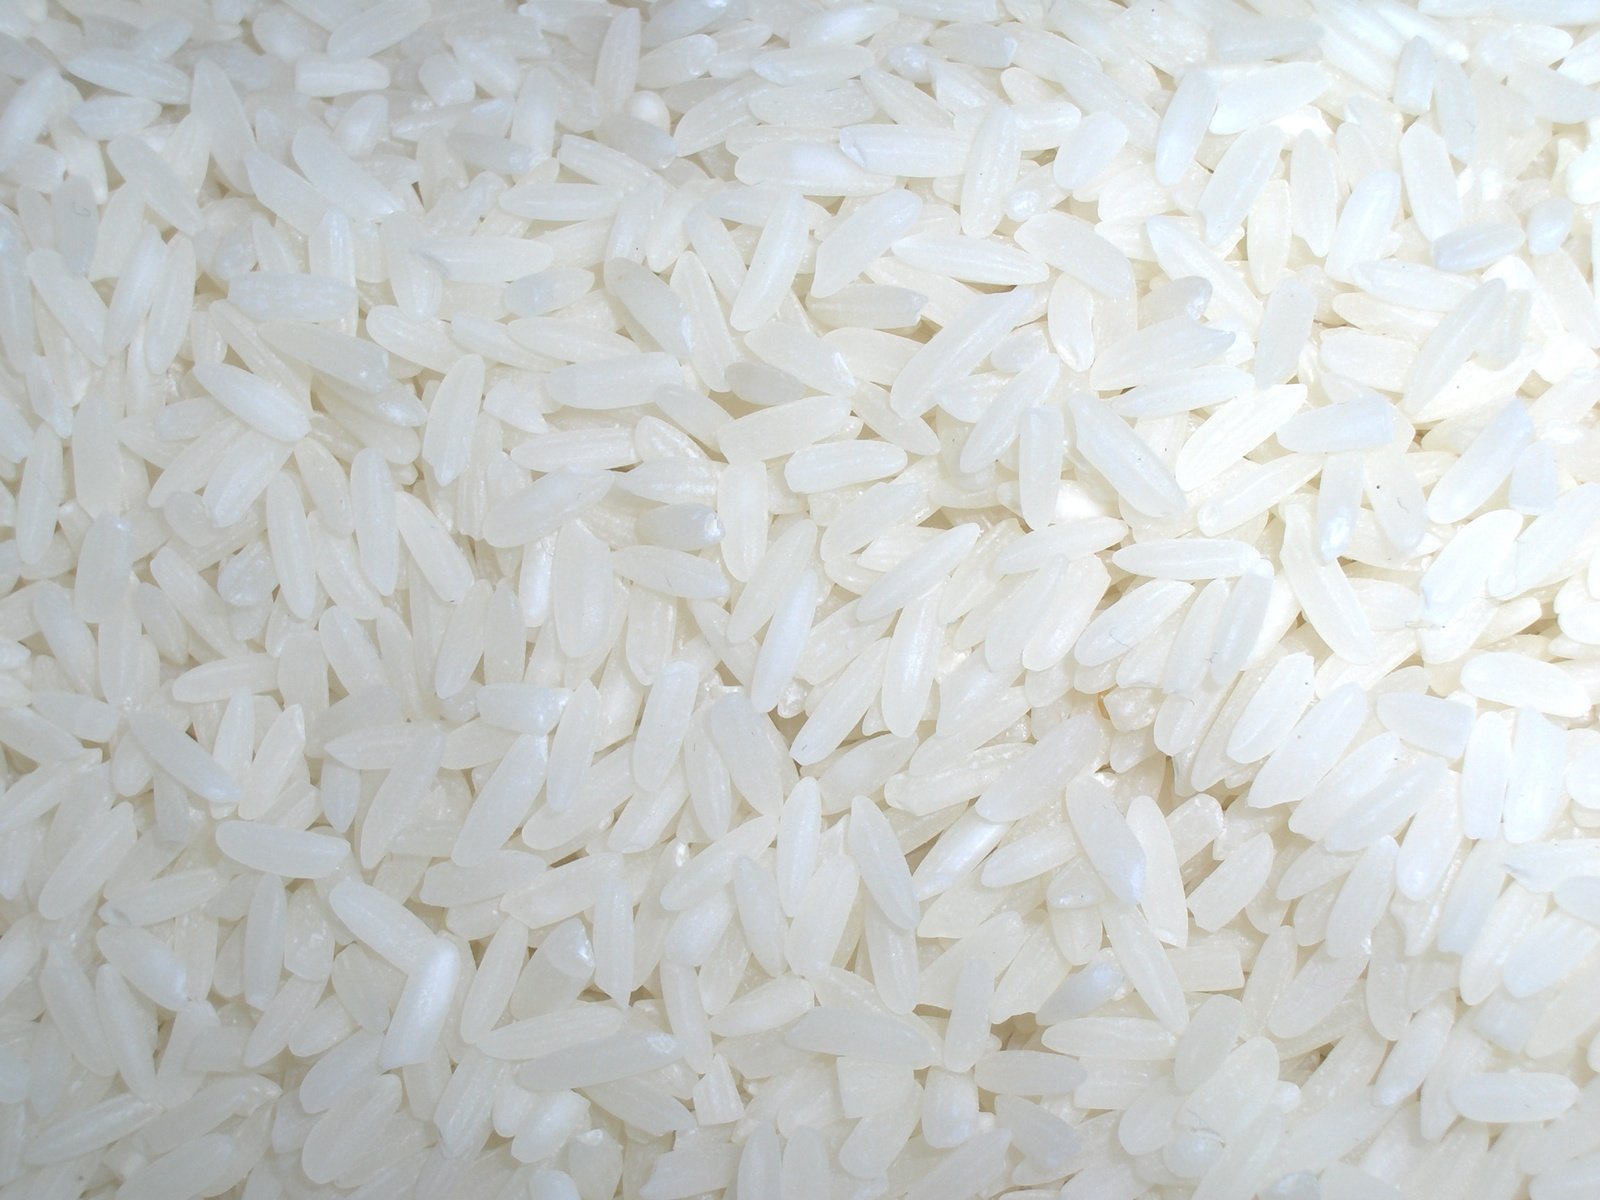 rice on the table, top view, is white color